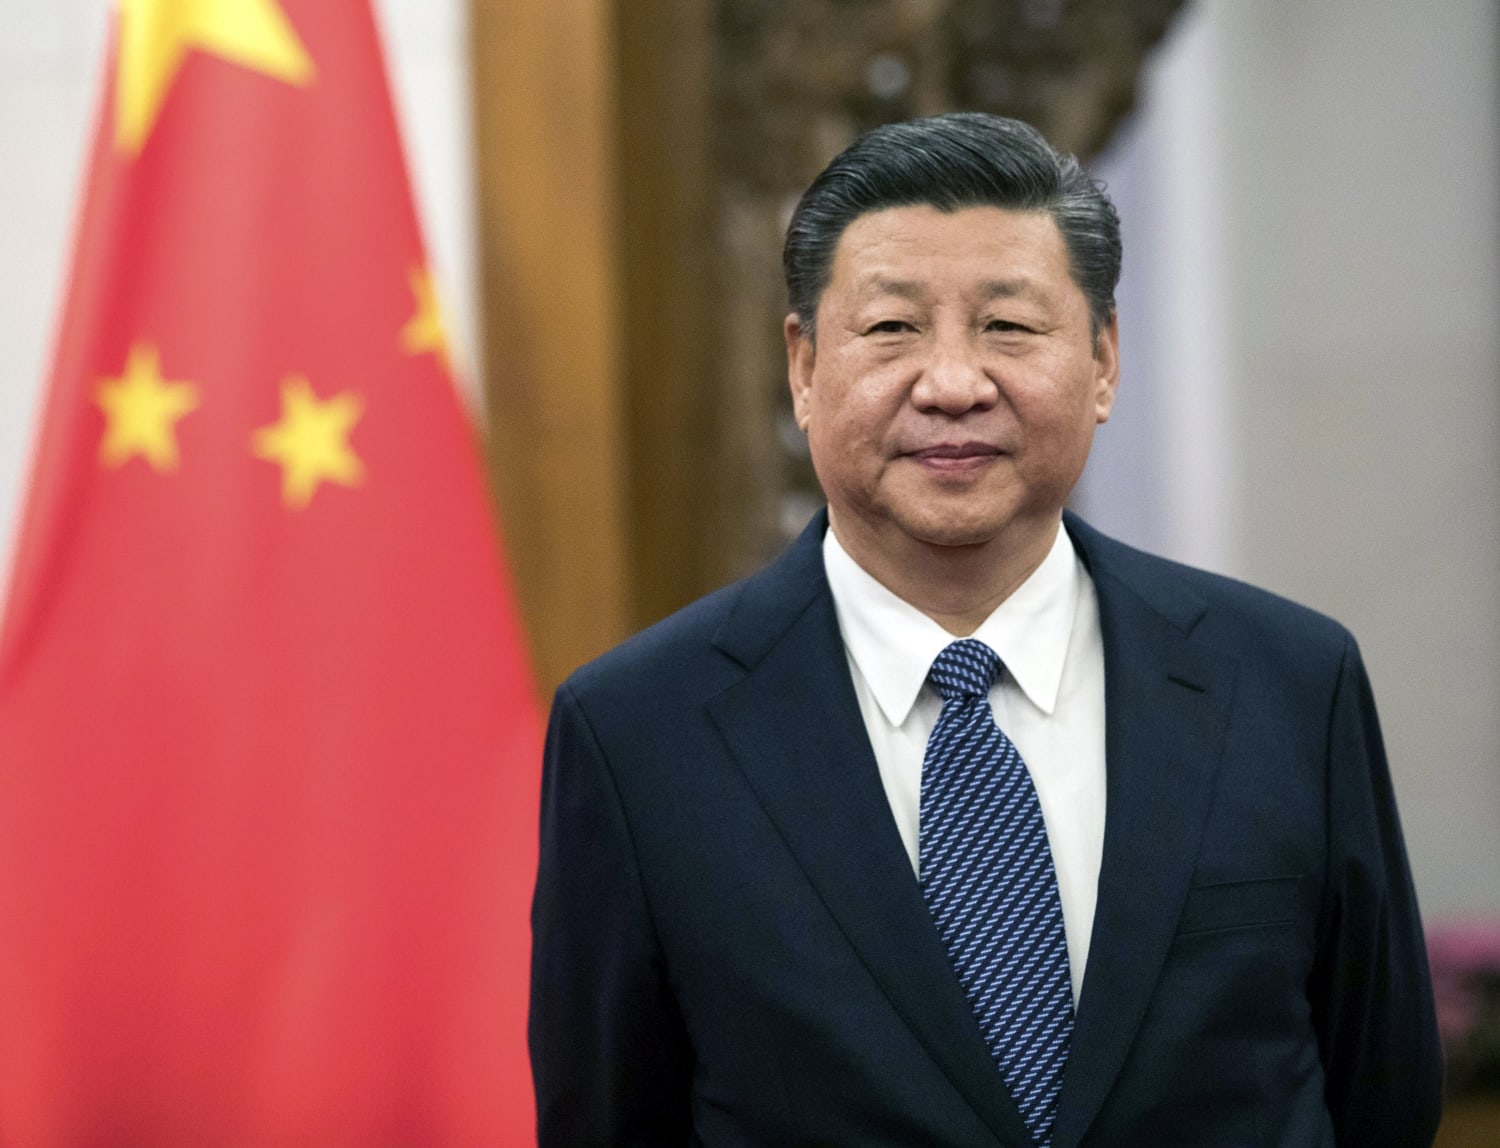 China sets stage for President Xi Jinping to stay in office with proposal to end term limits